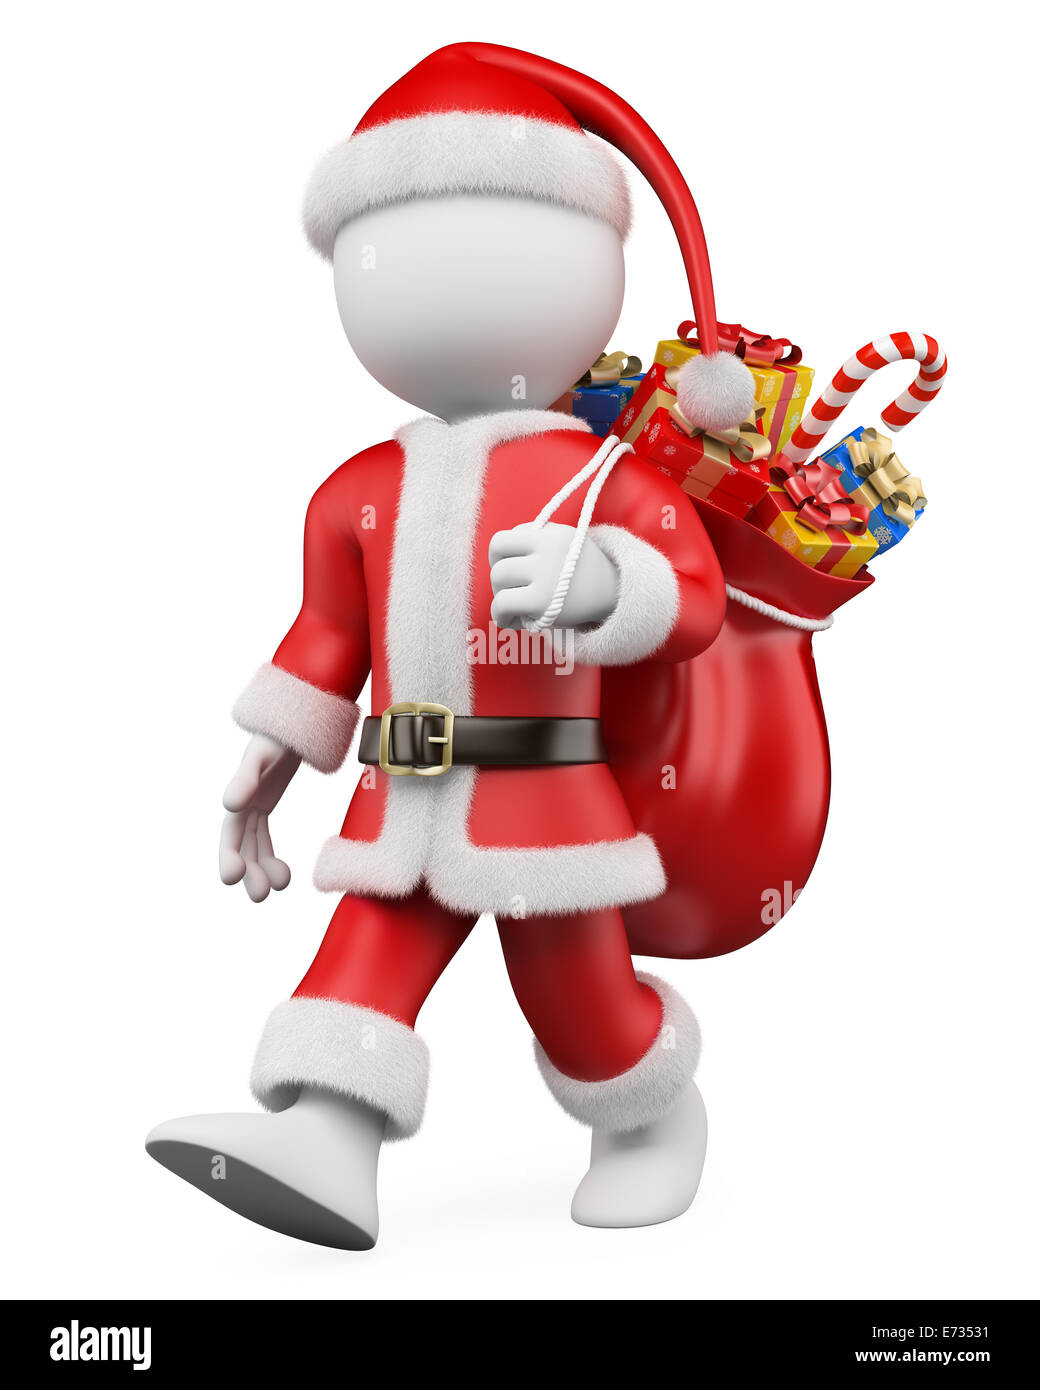 3d white christmas person. Santa Claus walking with a sack full of gifts. 3d image. Isolated white background. Stock Photo